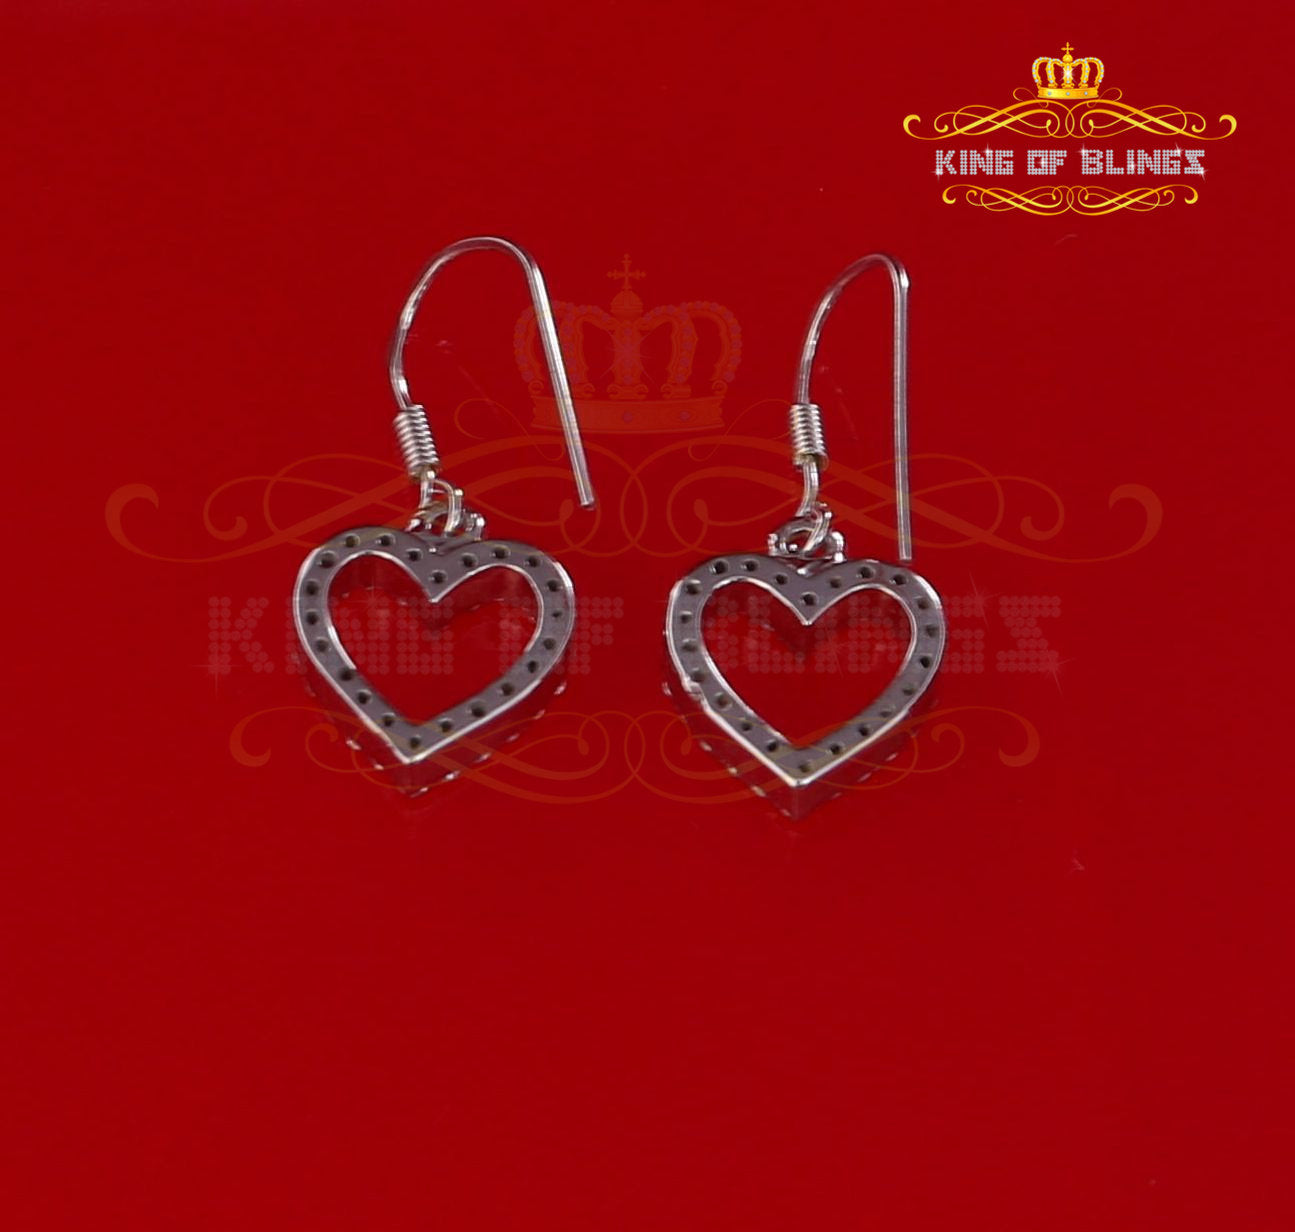 White Silver 0.88ct Cubic Zirconia Cluster Set For Ladies Dangling Heart Earring KING OF BLINGS